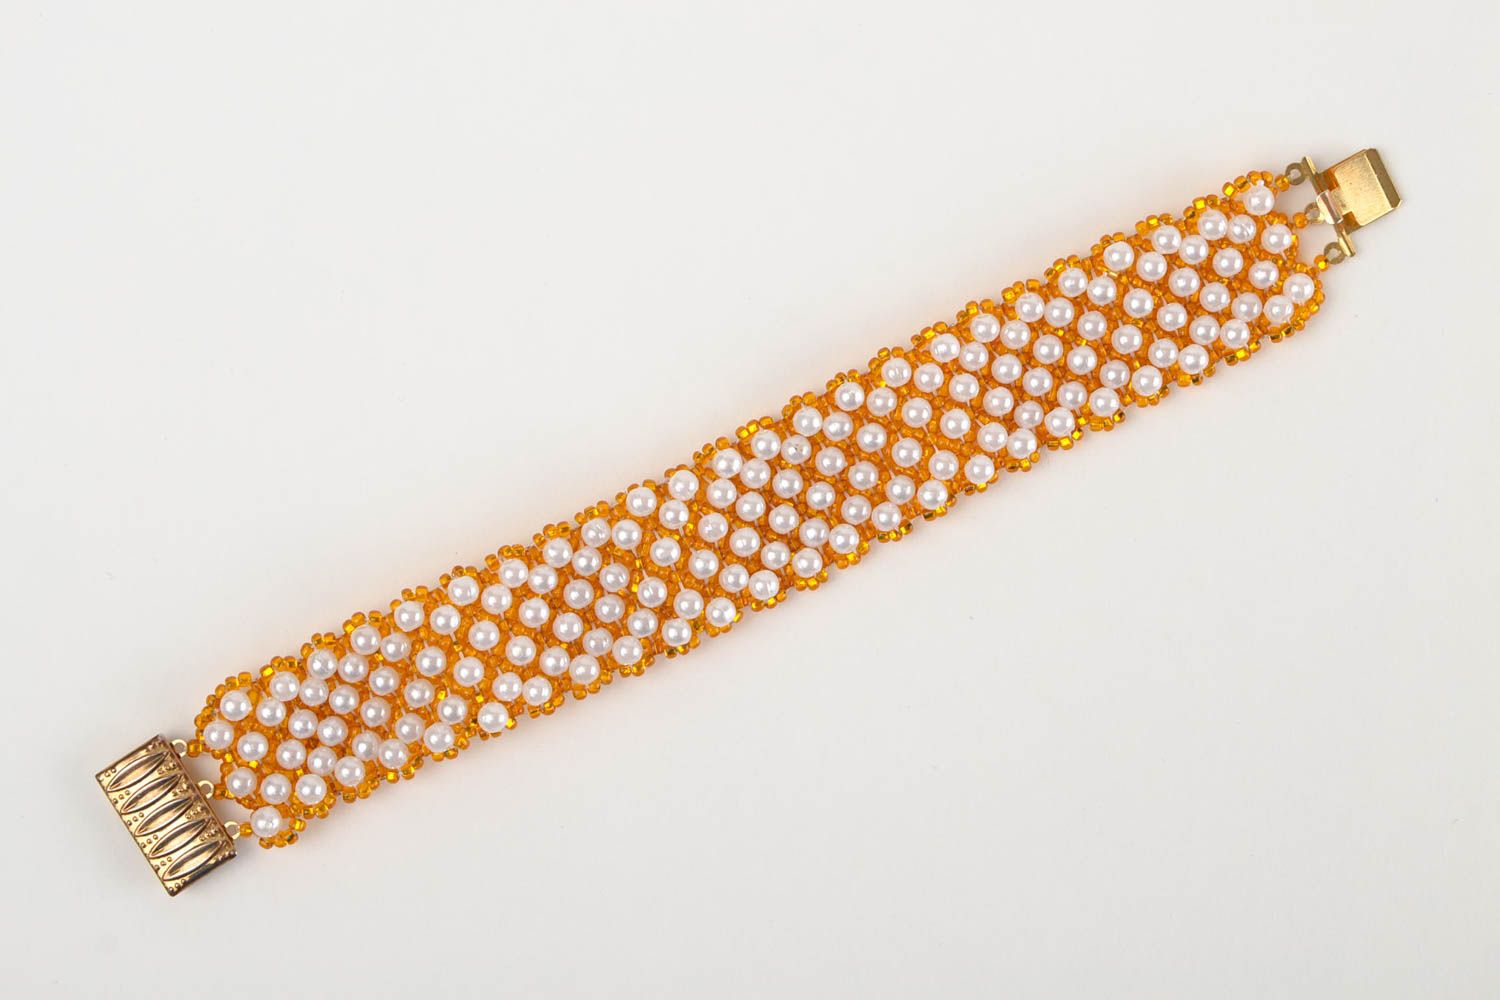 Handmade beaded wide bracelet in golden and white colors photo 3